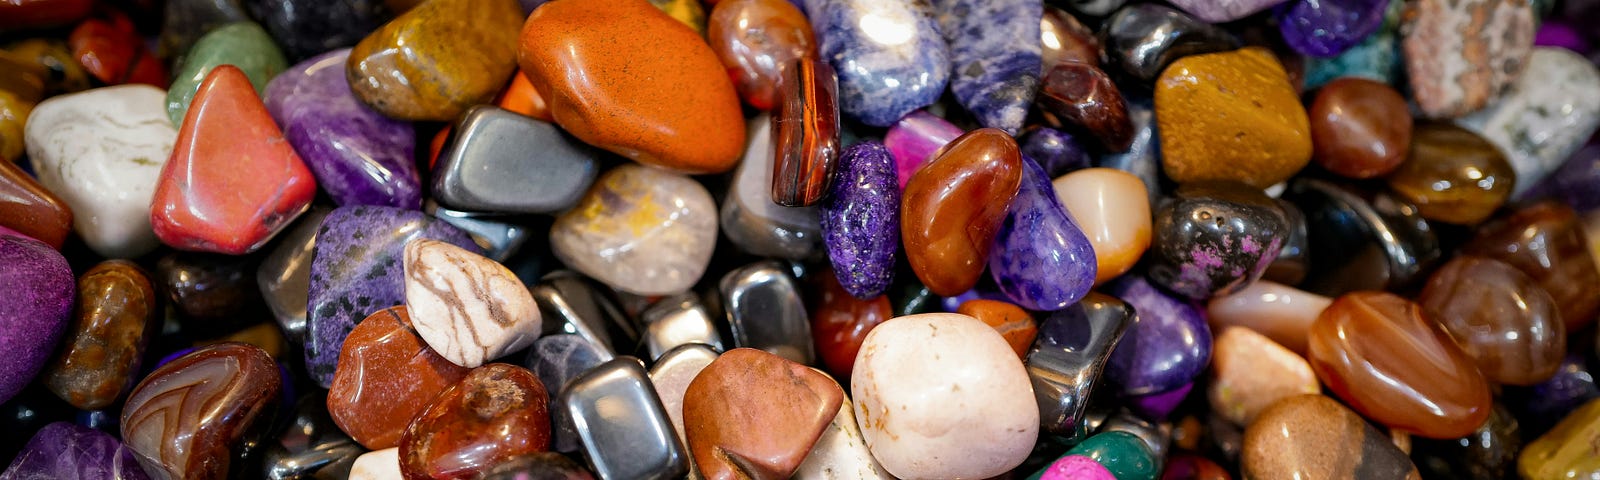 A colorful assortment of beautiful polished stones